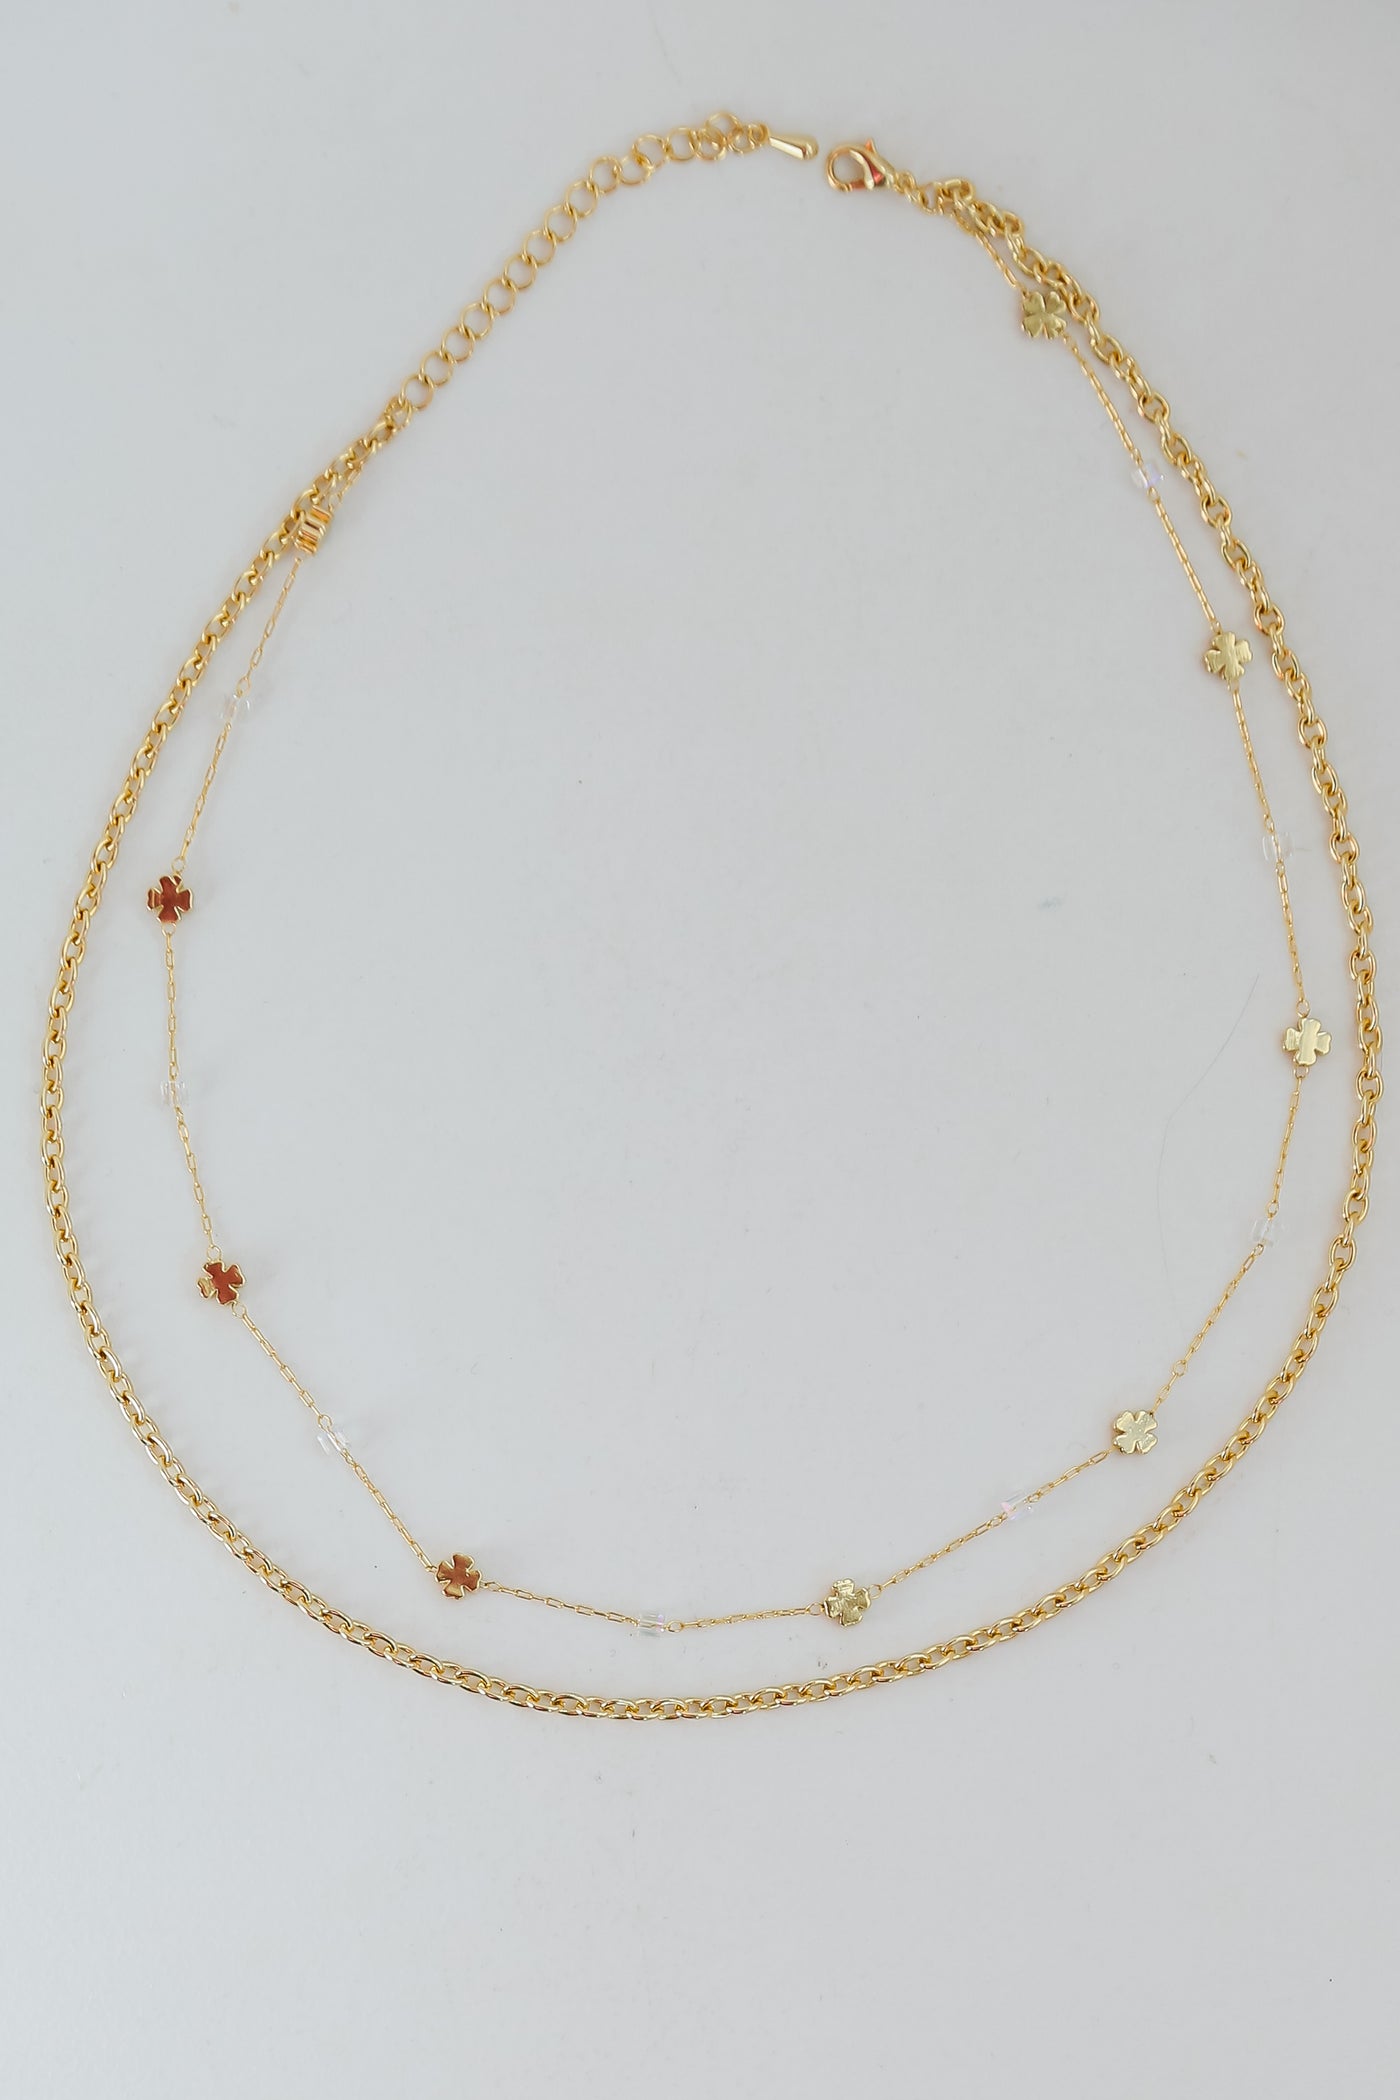 Gold Four Leaf Clover Layered Chain Necklace flat lay